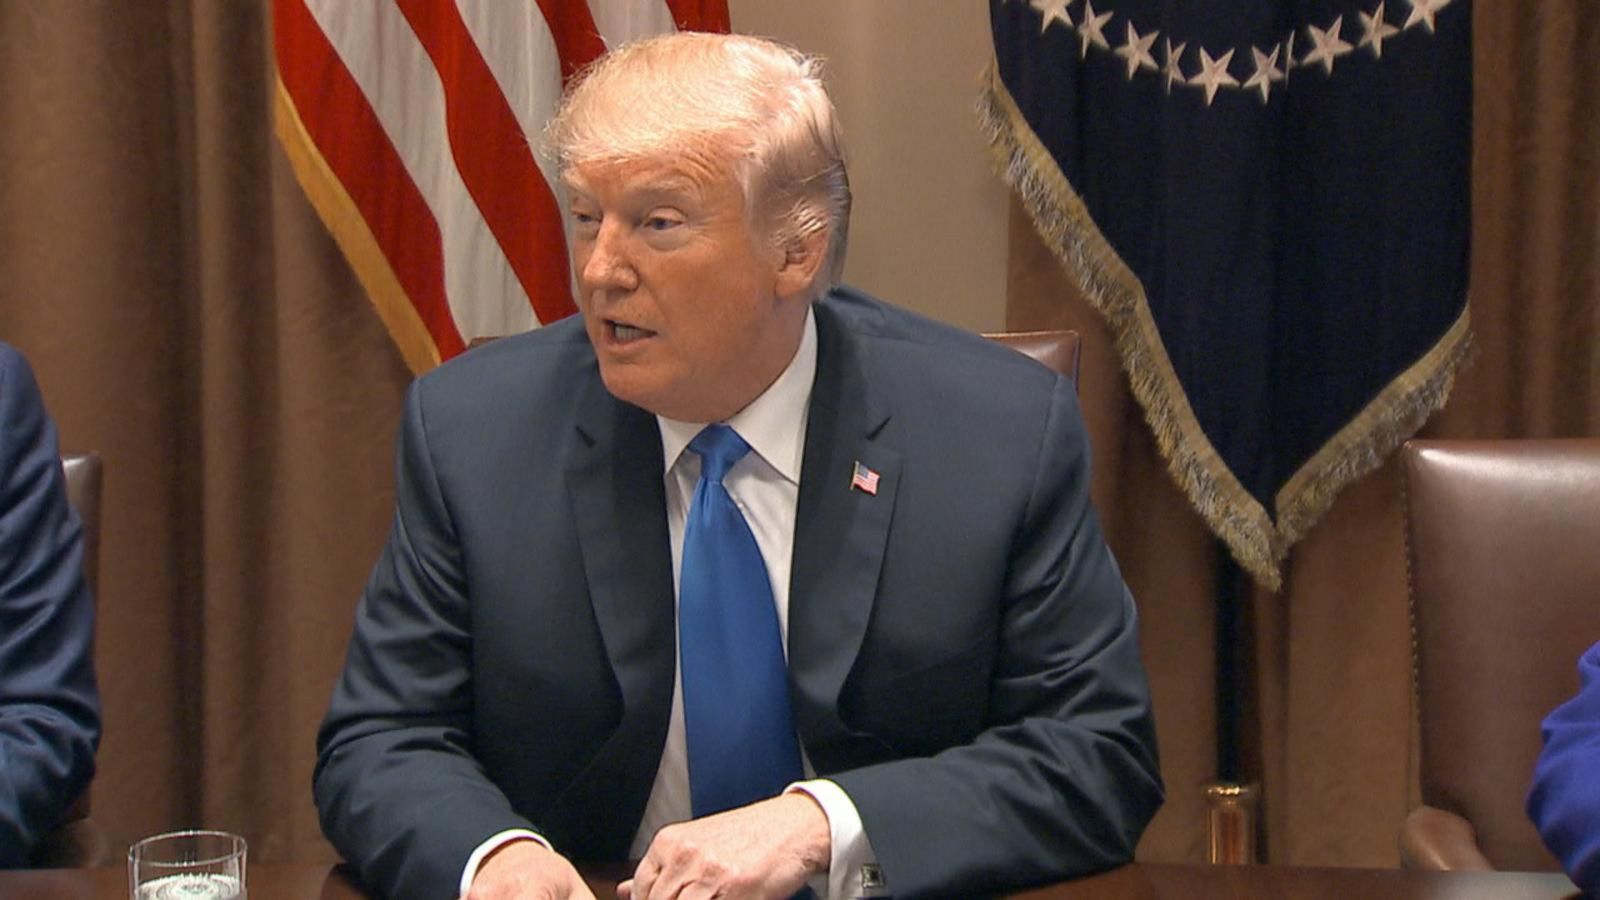 VIDEO: Trump calls out NRA in meeting on gun control